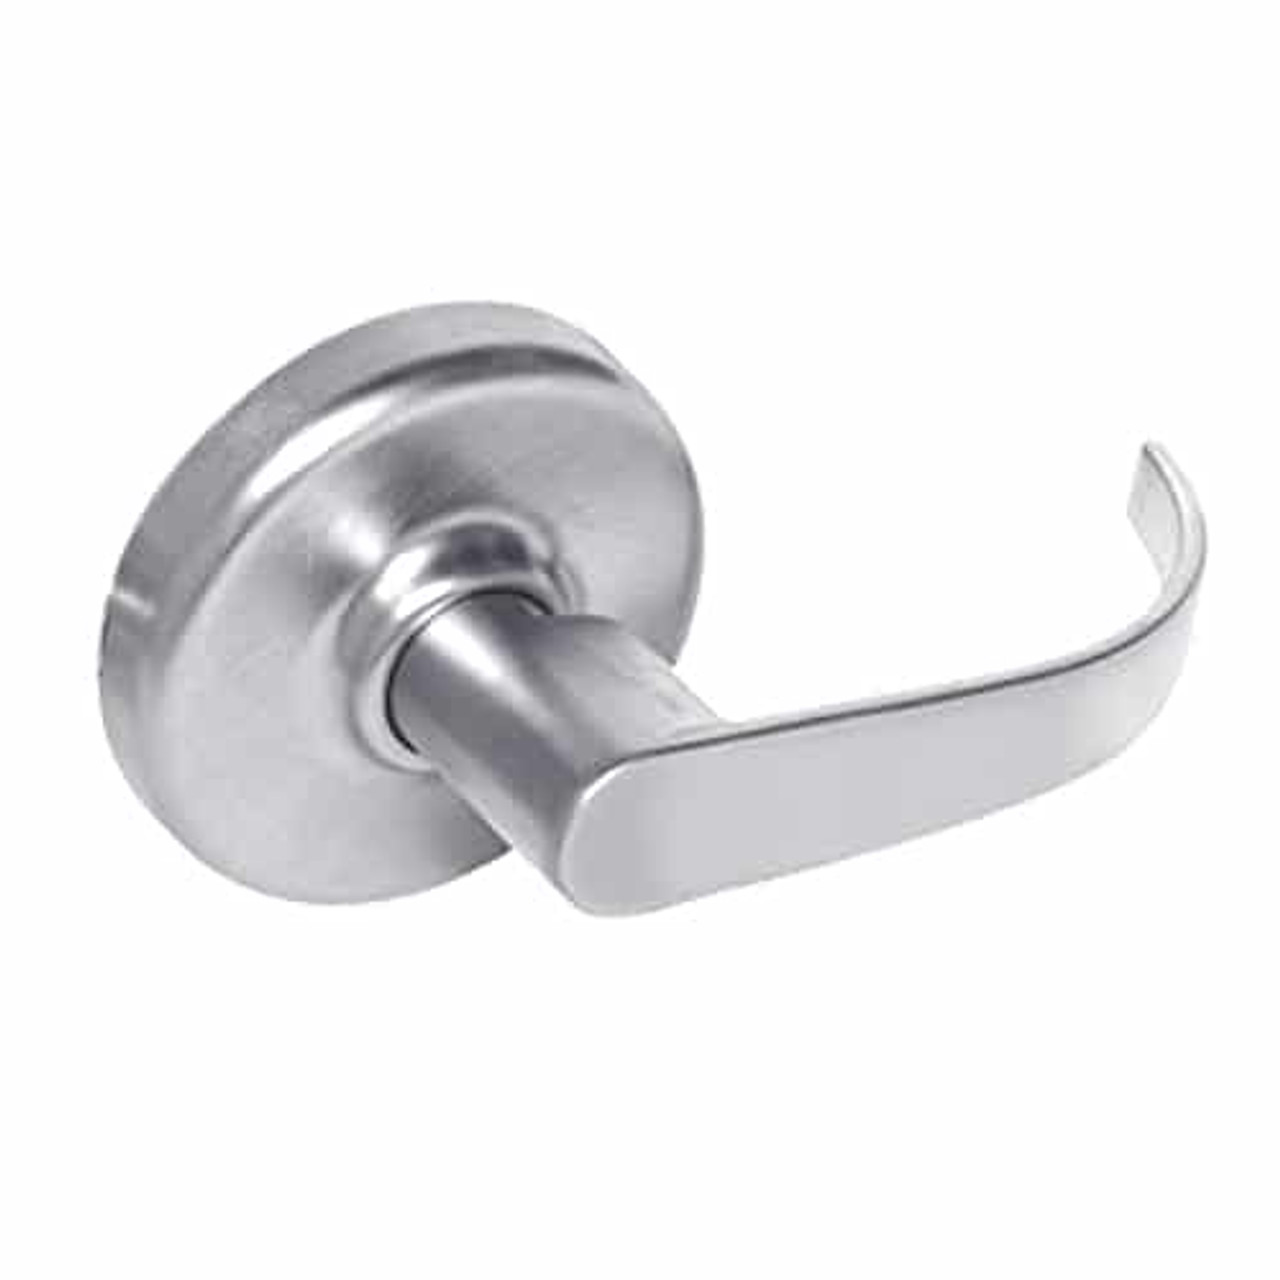 CL3580-PZD-625 Corbin CL3500 Series Heavy Duty Passage with Blank Plate Cylindrical Locksets with Princeton Lever in Bright Chrome Finish